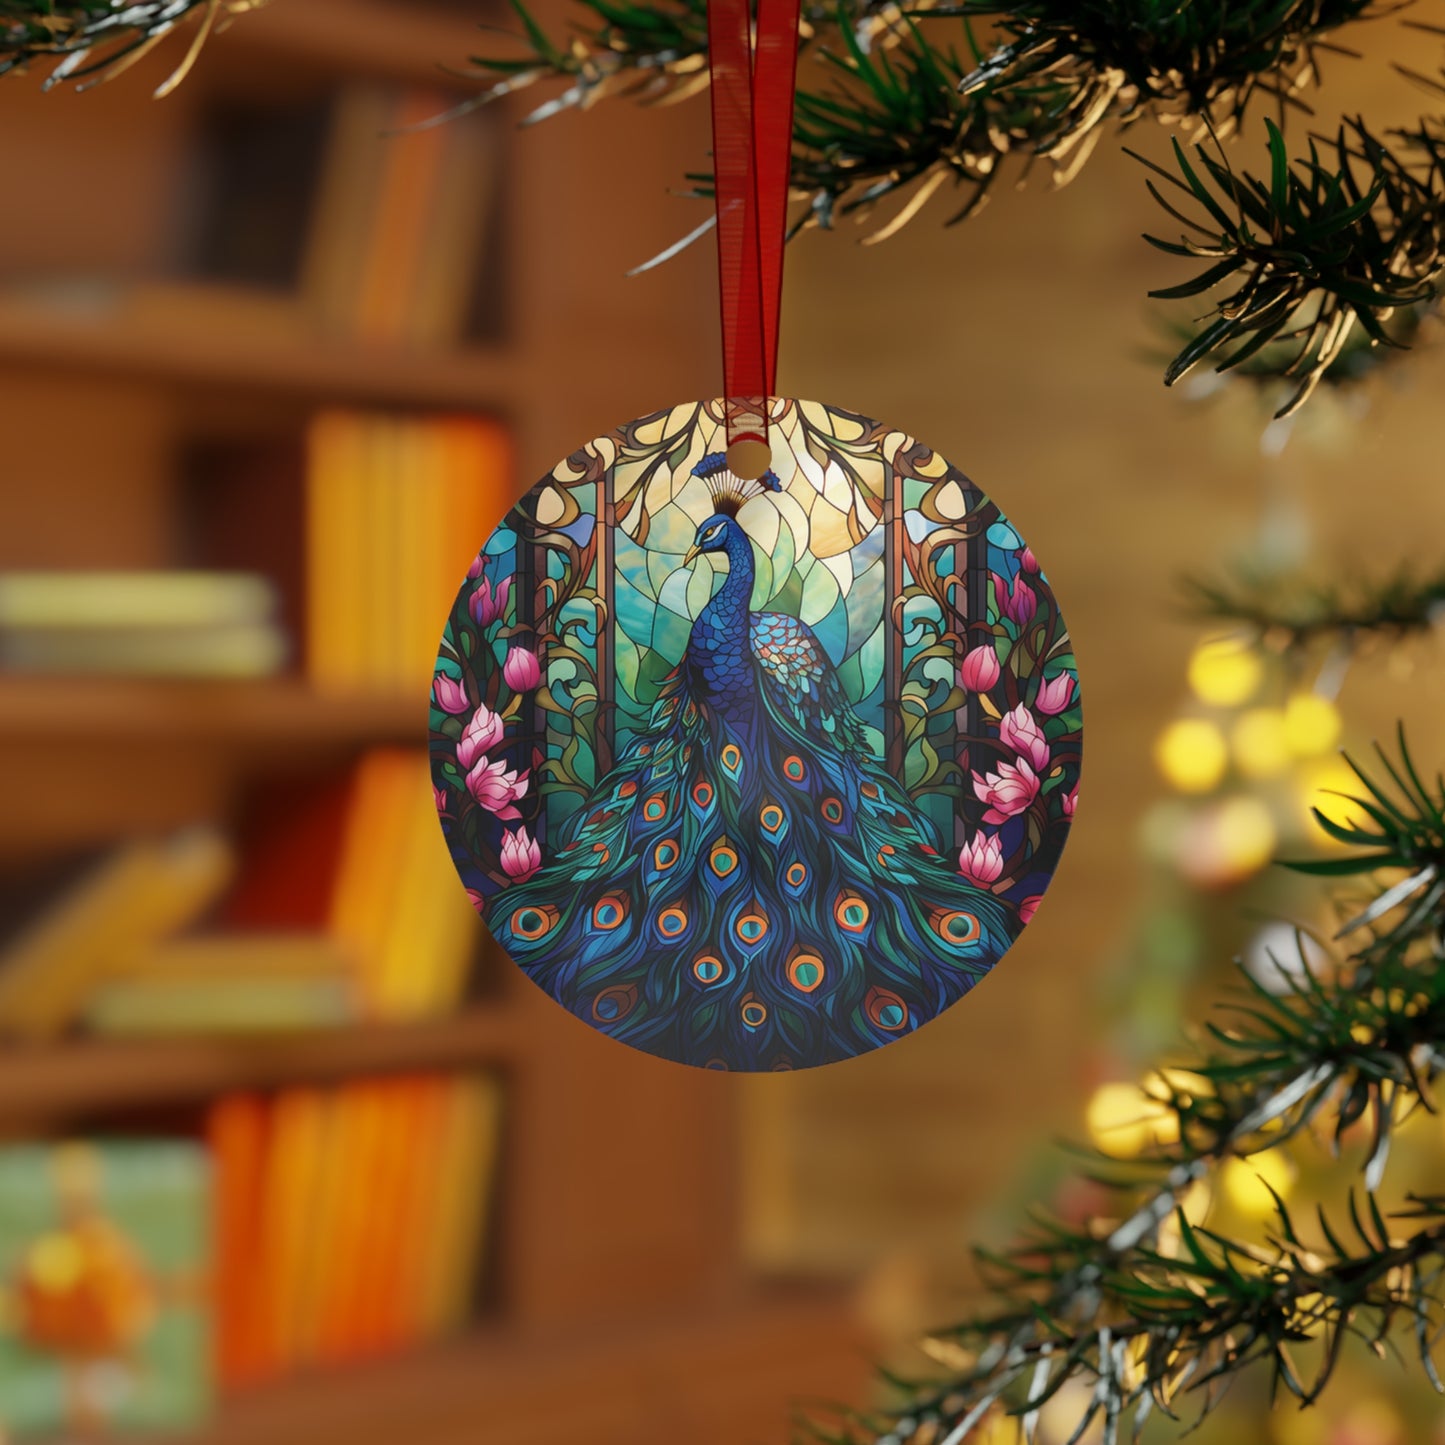 Peacock Ornament Stained Glass Style Ornament Lightweight Shaterproof Metal Ornaments Christmas Ornament Exchange Christmas Peacock Feathers